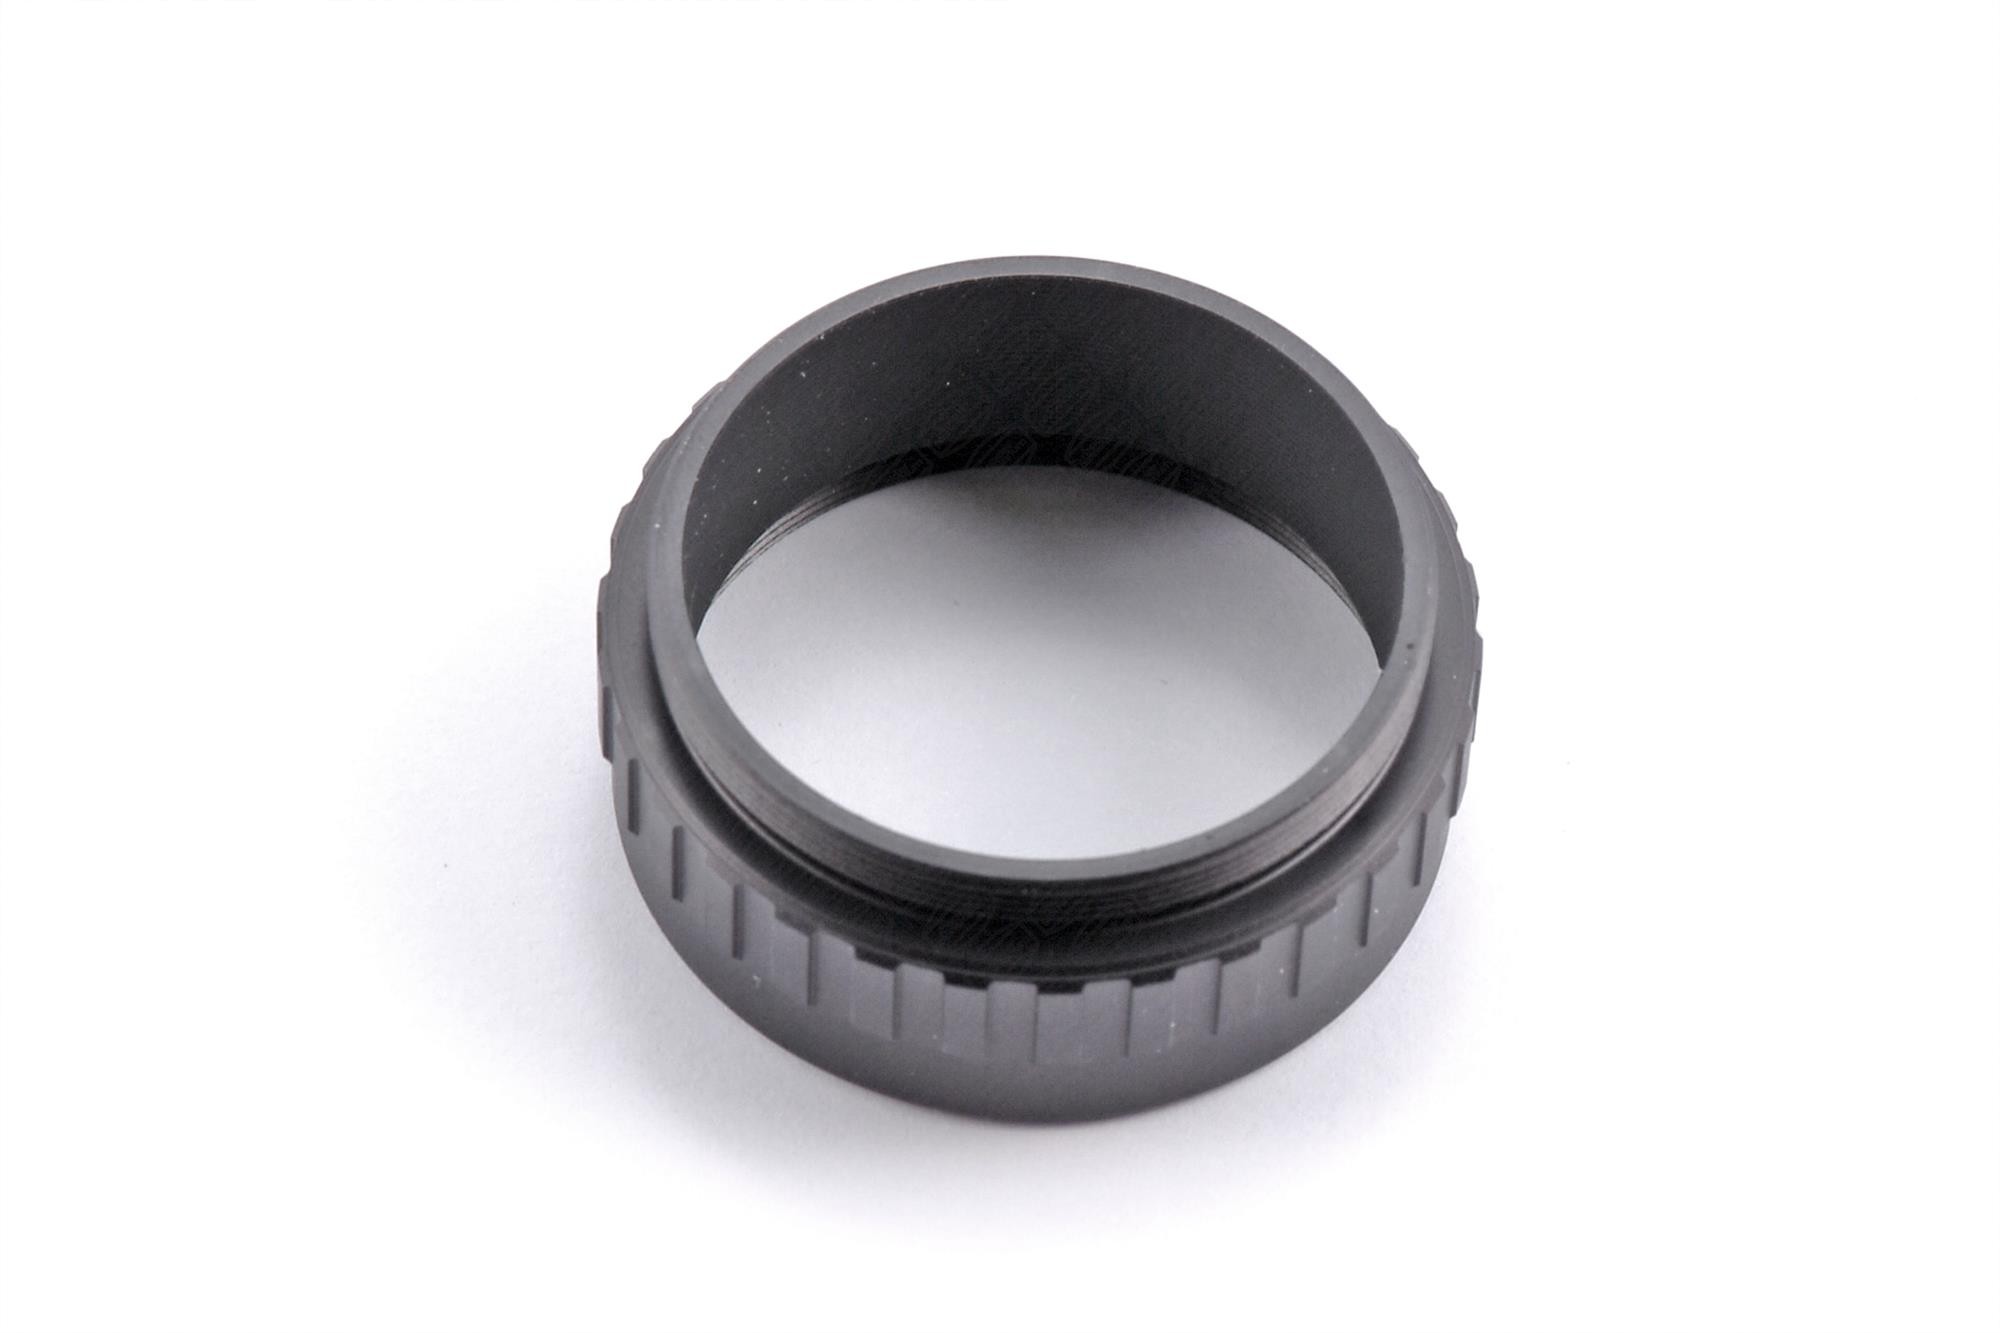 Baader T-2 / 15 mm Extension Tube (T-2 part #25A)